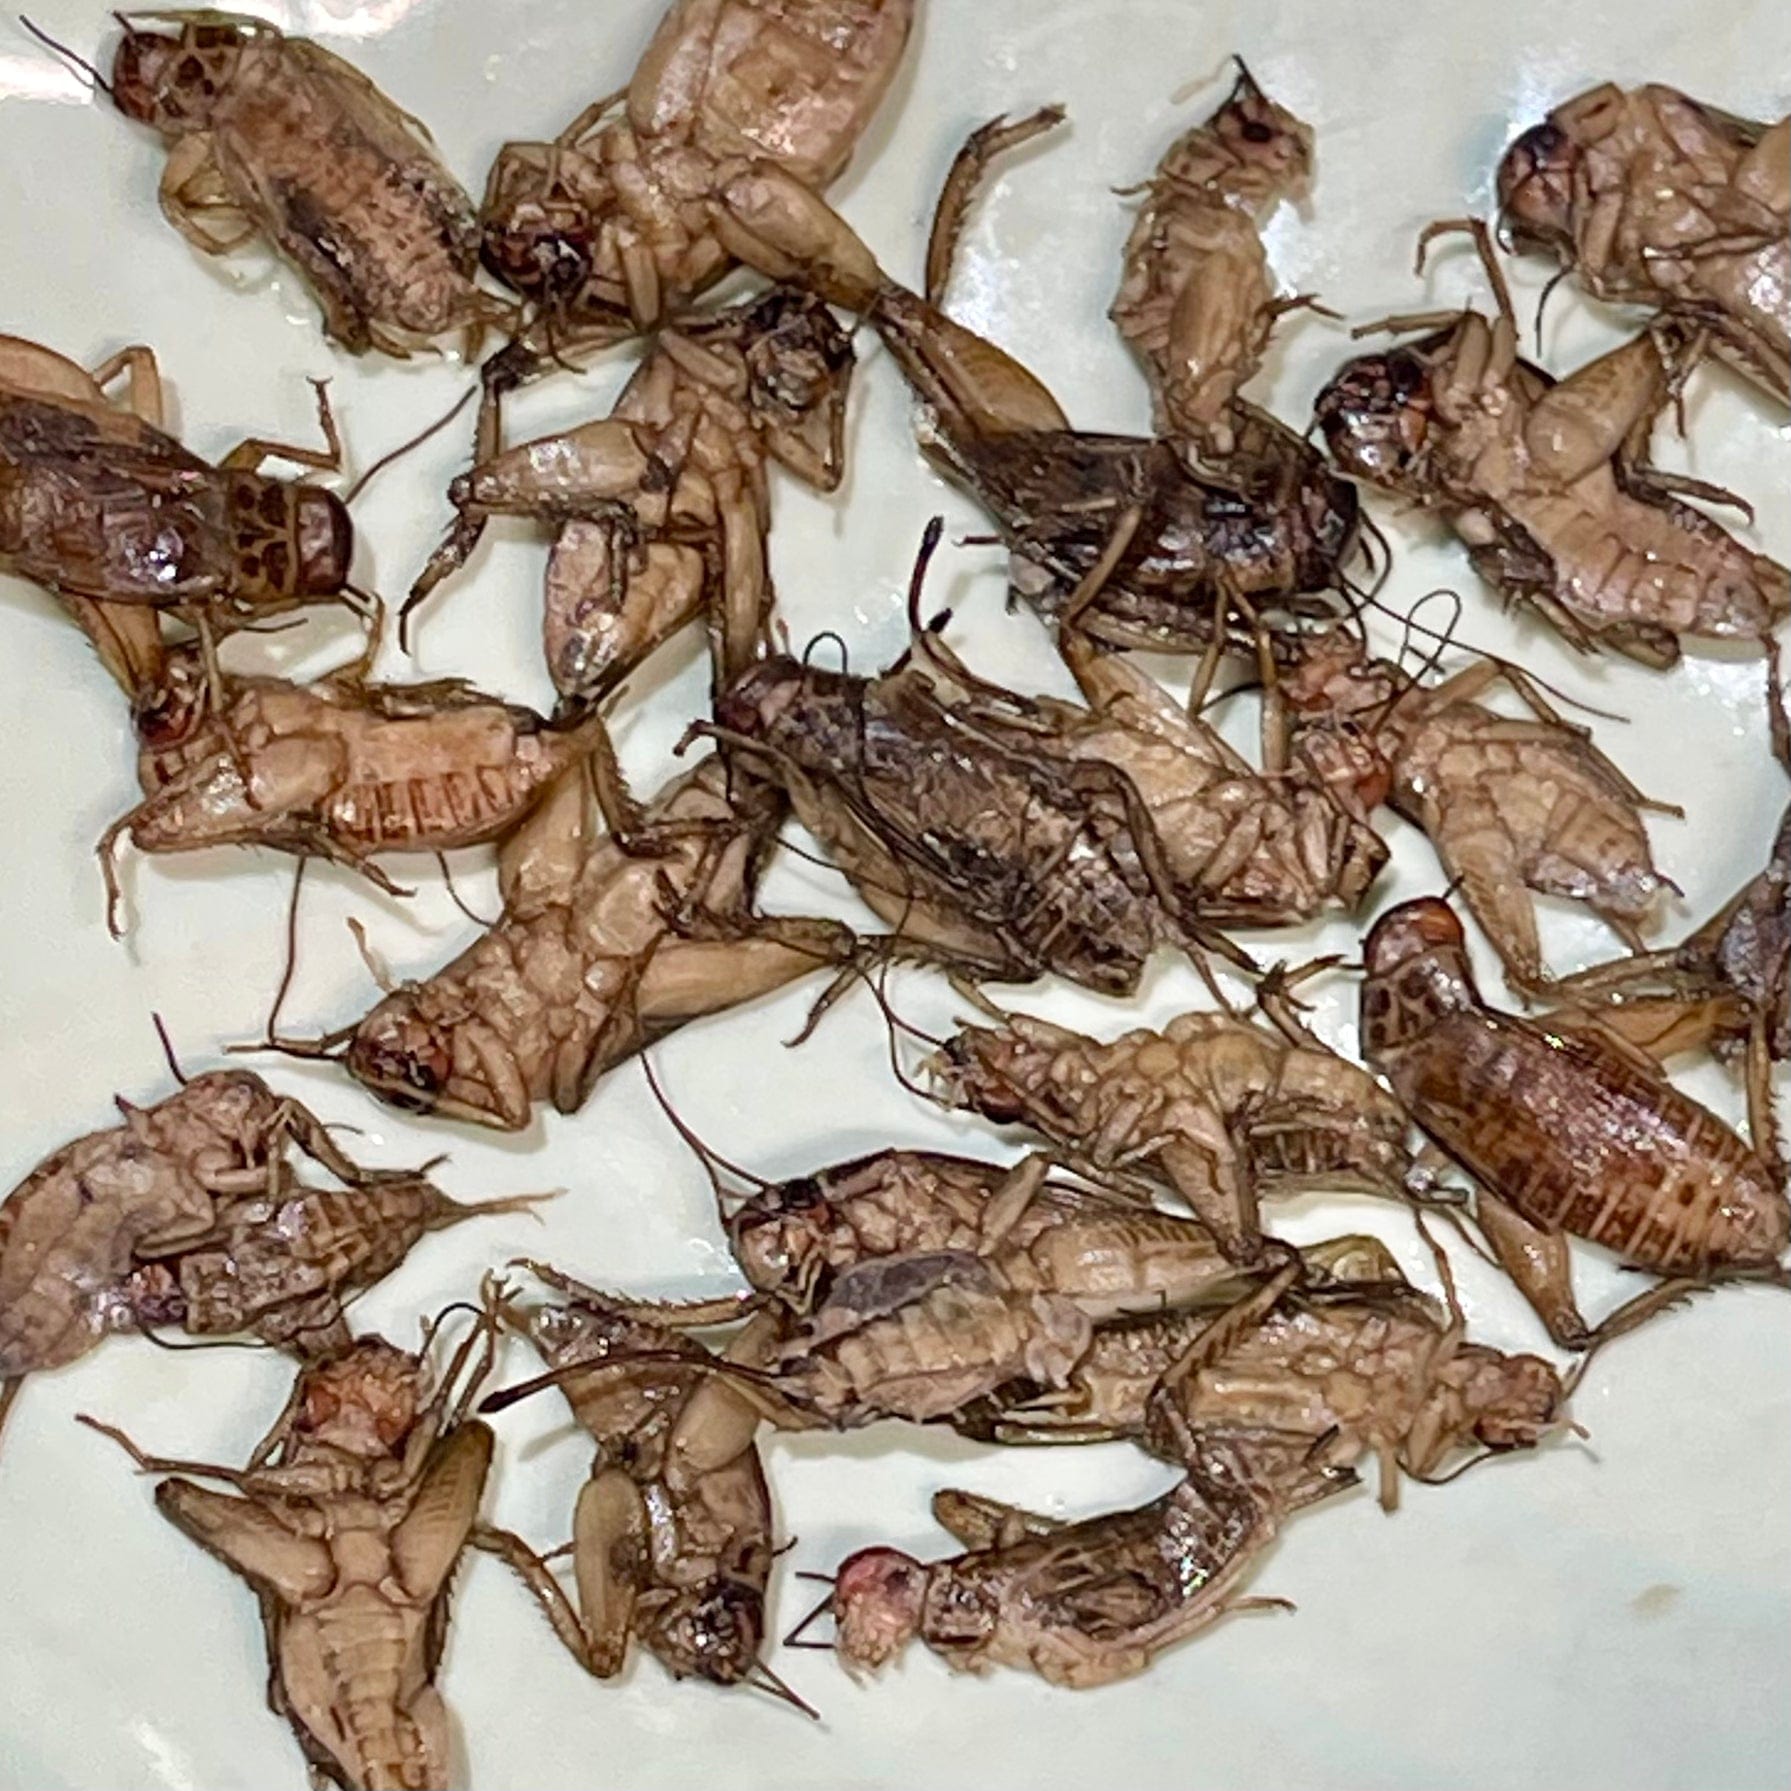 Reptile Realm SUPER FRESH INSECTS Crickets - Super Fresh Insects